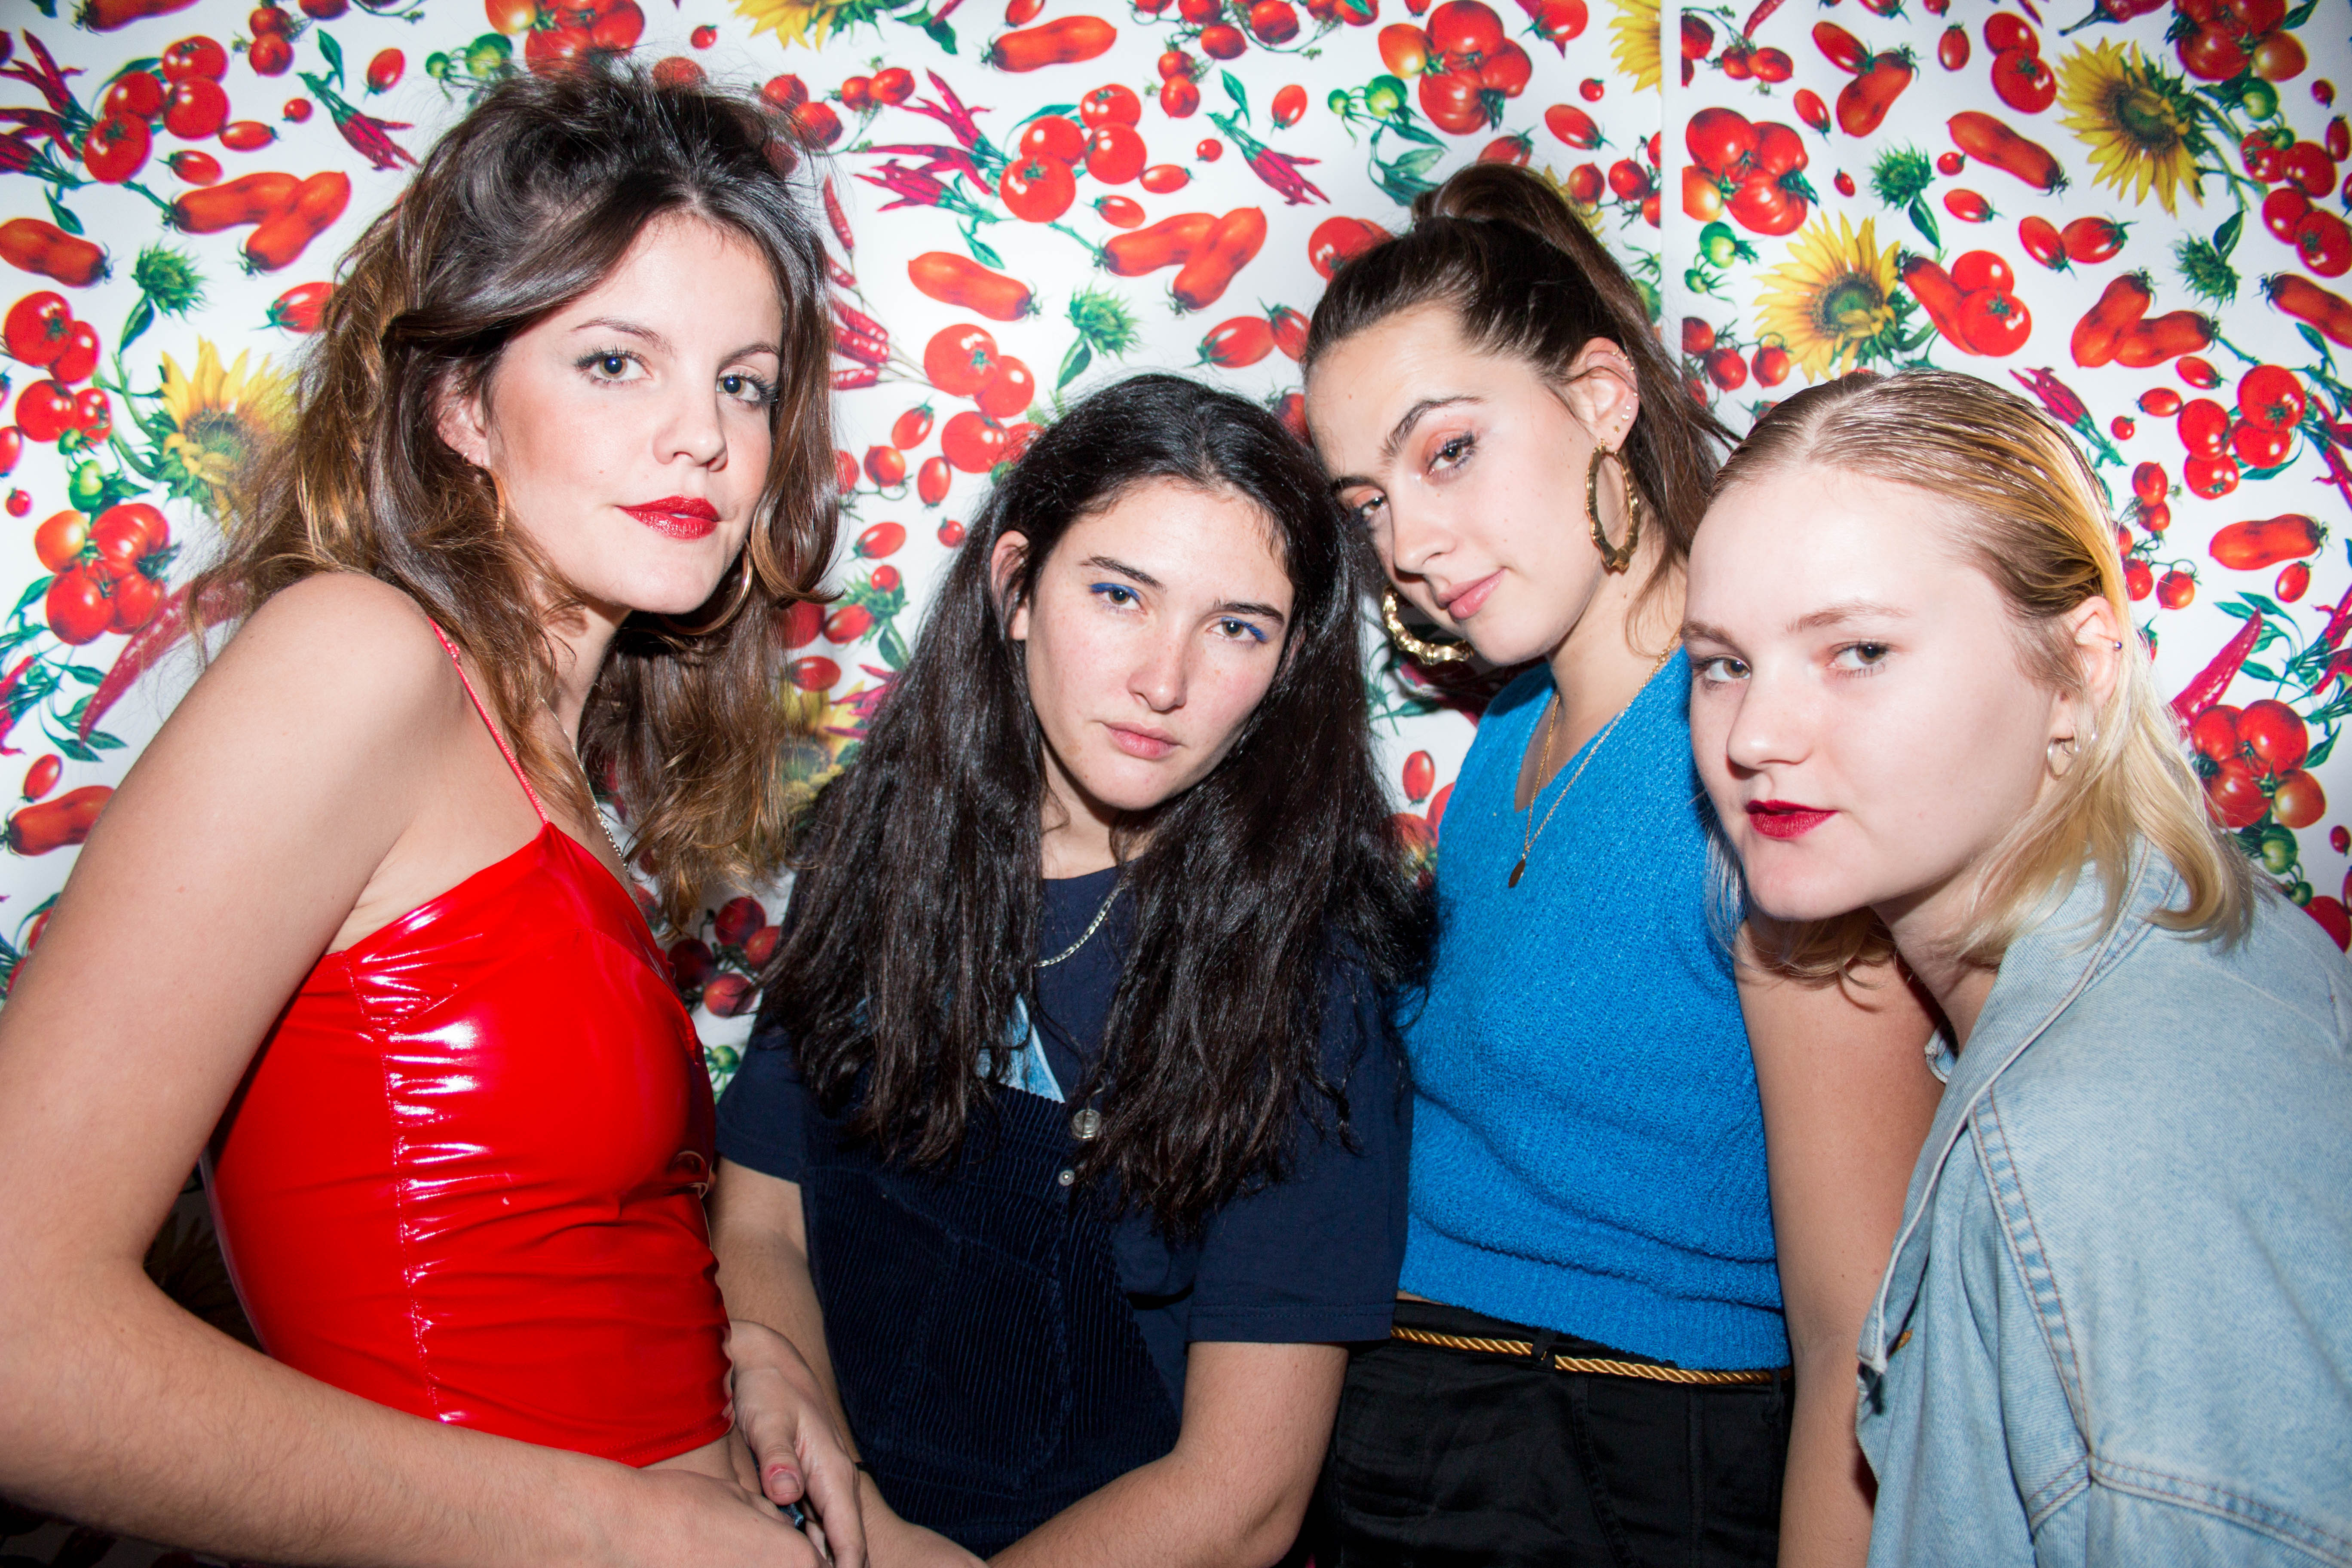 Promo image of Hinds for The Club single release